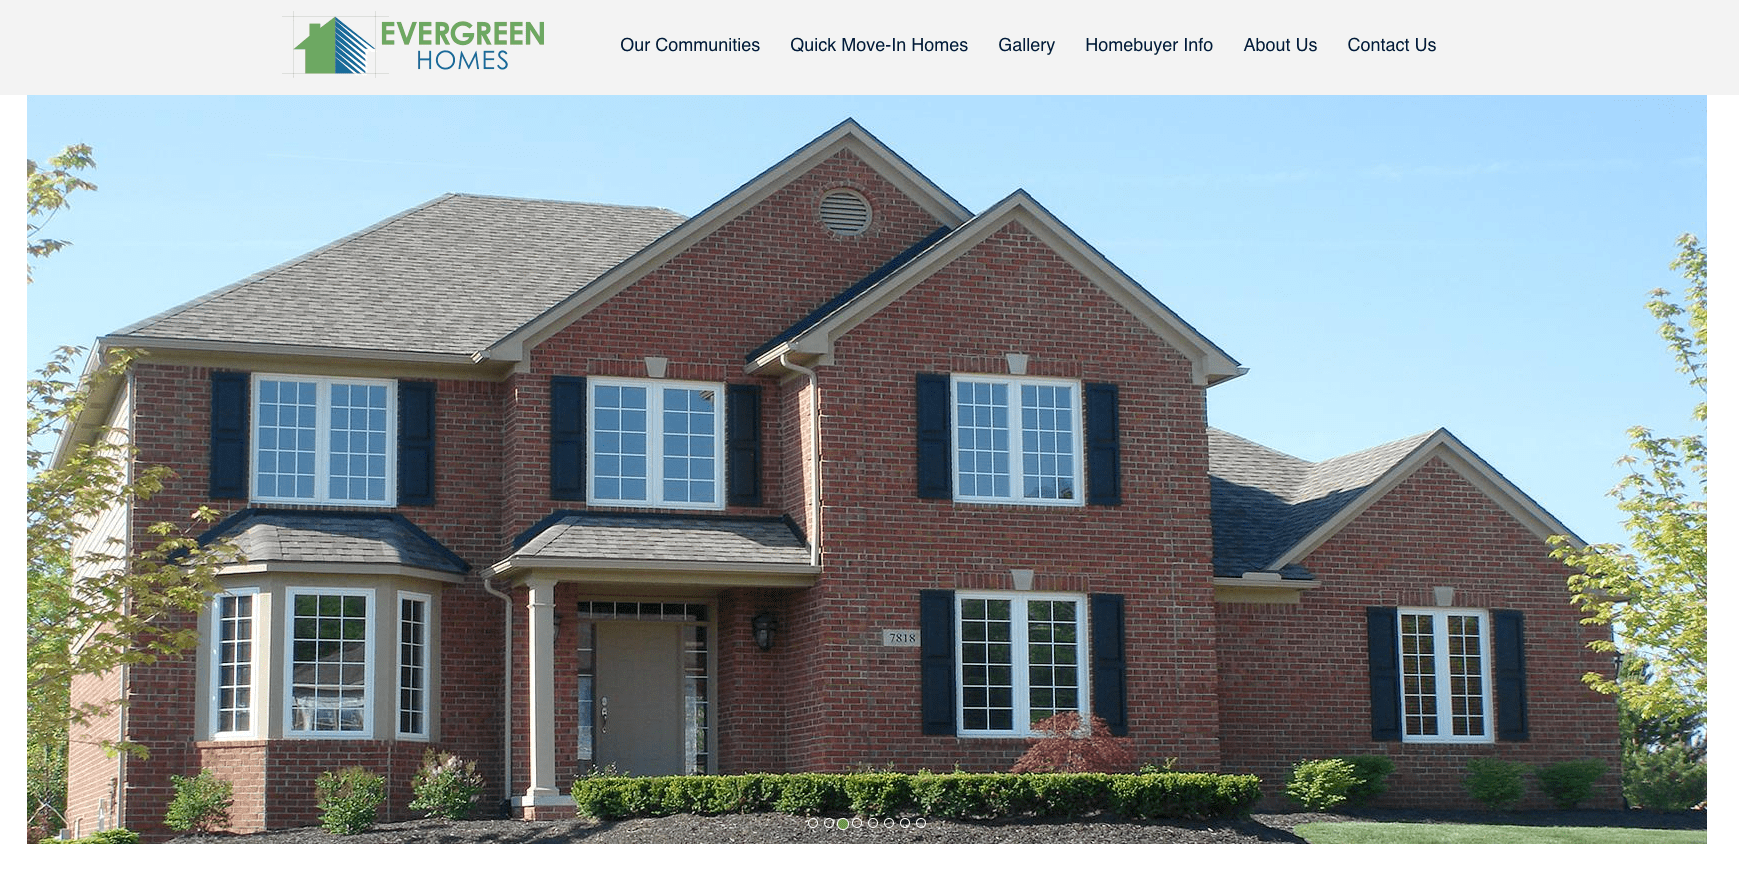 Michigan Home Builder Increases Organic Lead Generation by 420%